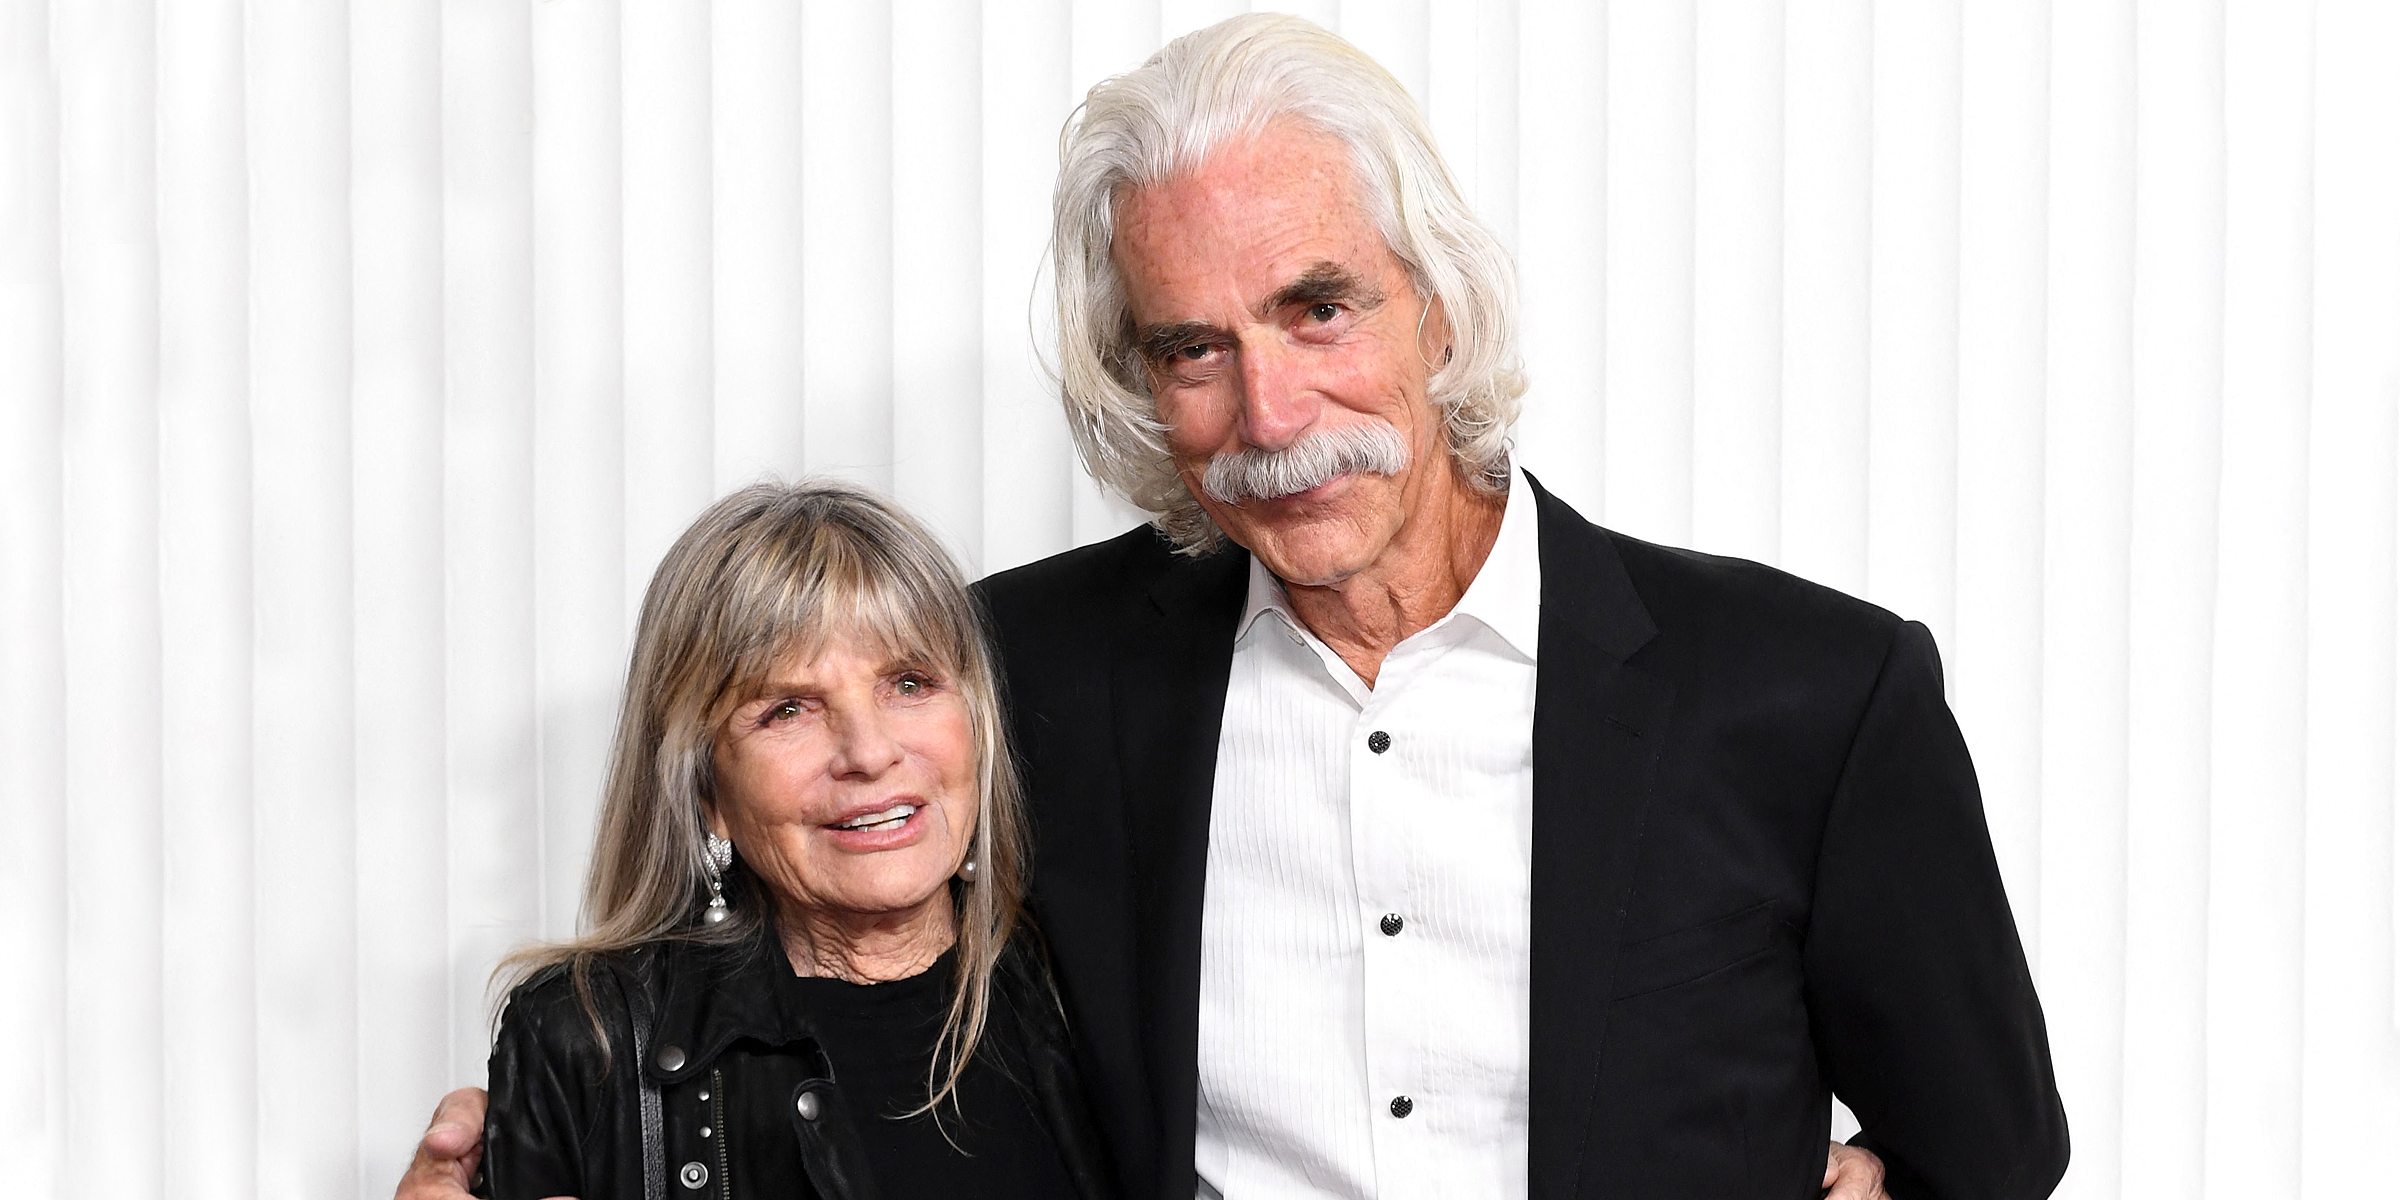 Sam Elliott and his wife Katherine Ross | Source: Getty Images